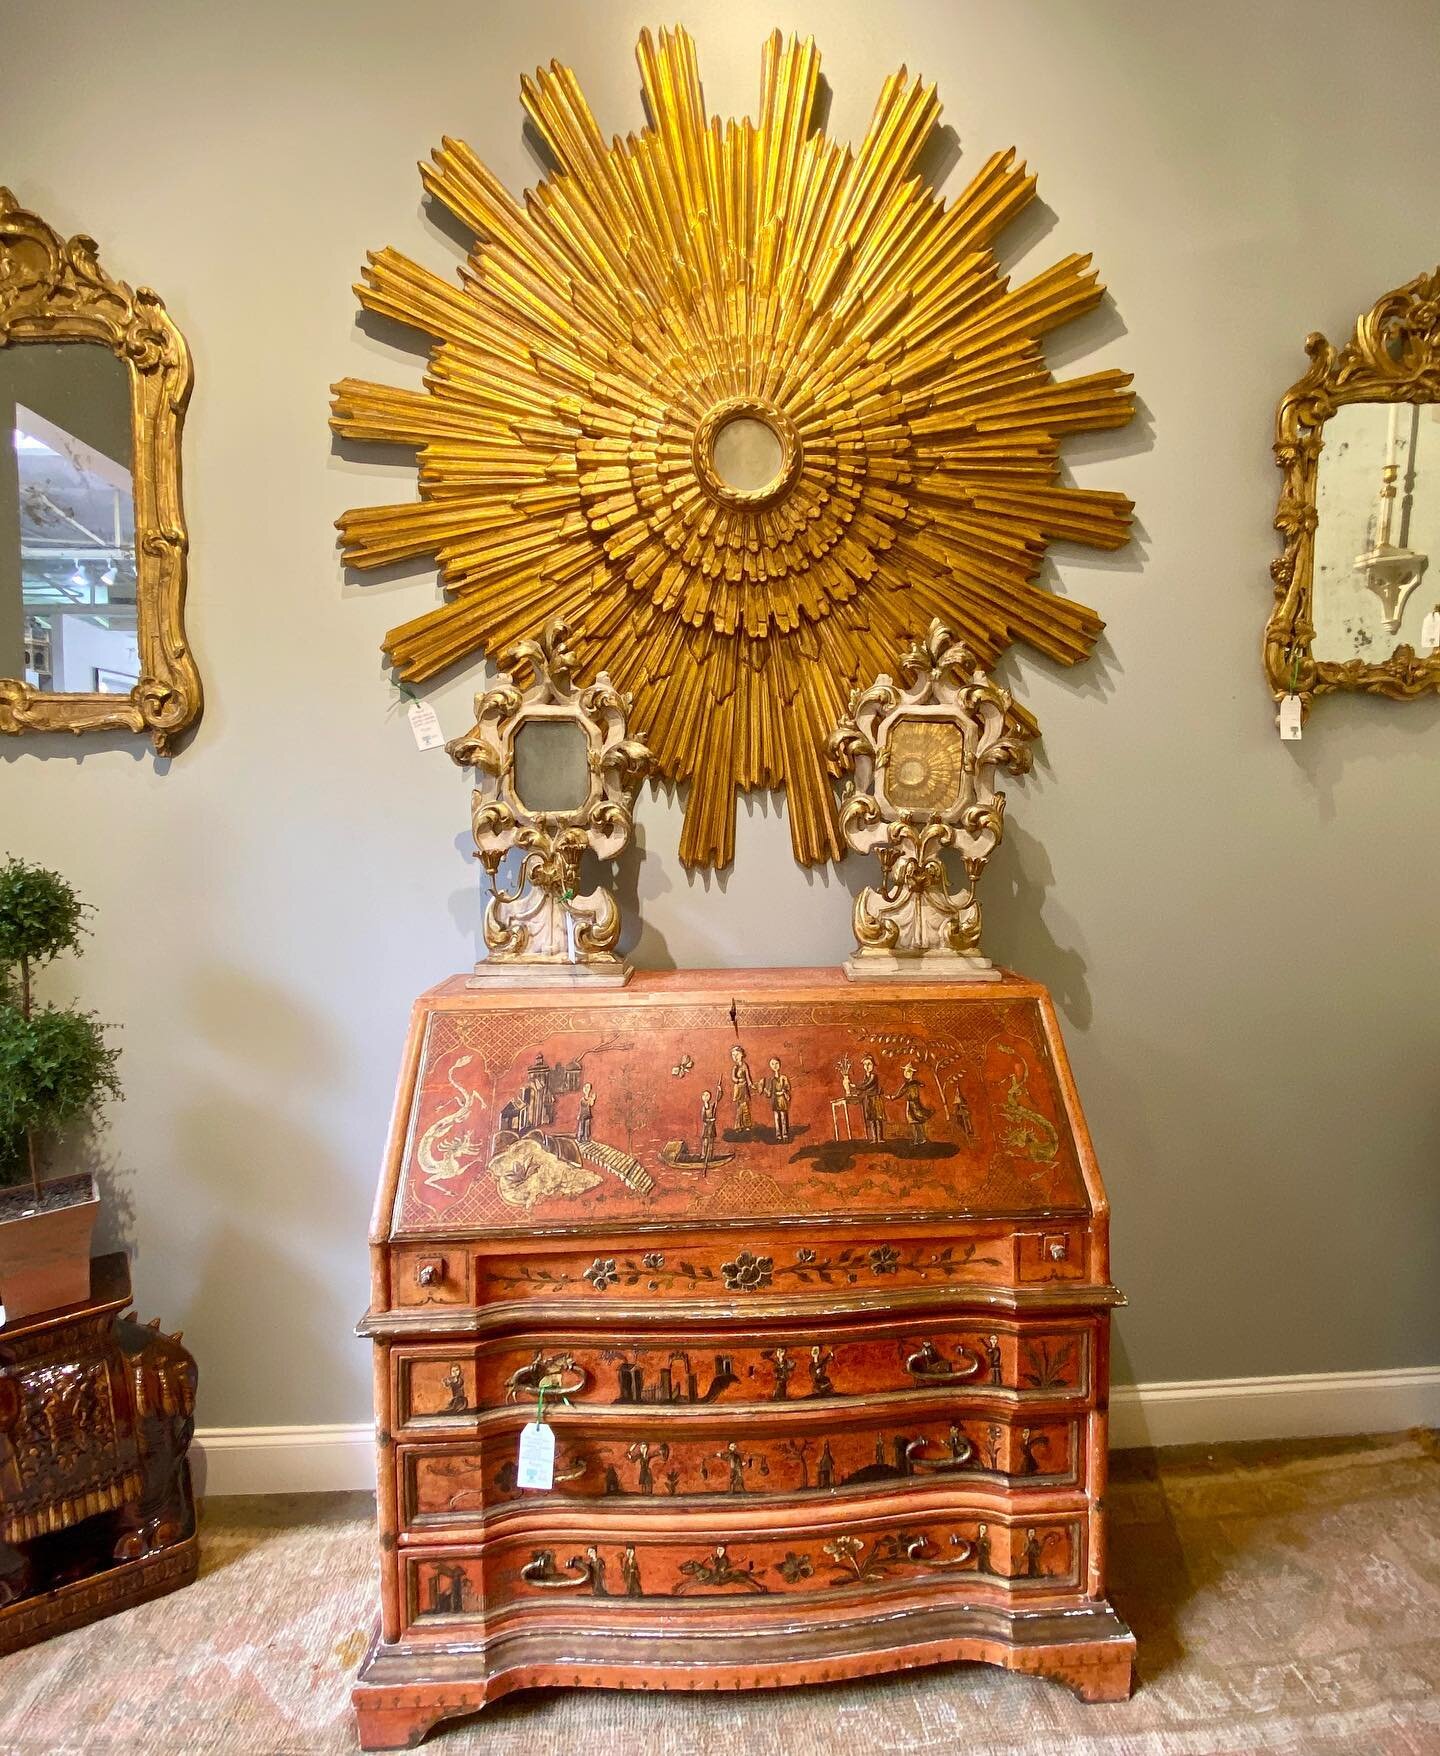 Here comes the sun at Wolf Hall Antiques☀️
.
Art Deco Giltwood Mirror in Pine, circa 1920
.
Pair of Italian 18th Century Mirror Backed Girandoles
.
18th Century Spanish Chinoiserie Bureau from Catalan, Pine Wood, Repainted in the 1920&rsquo;s
.
#wolf